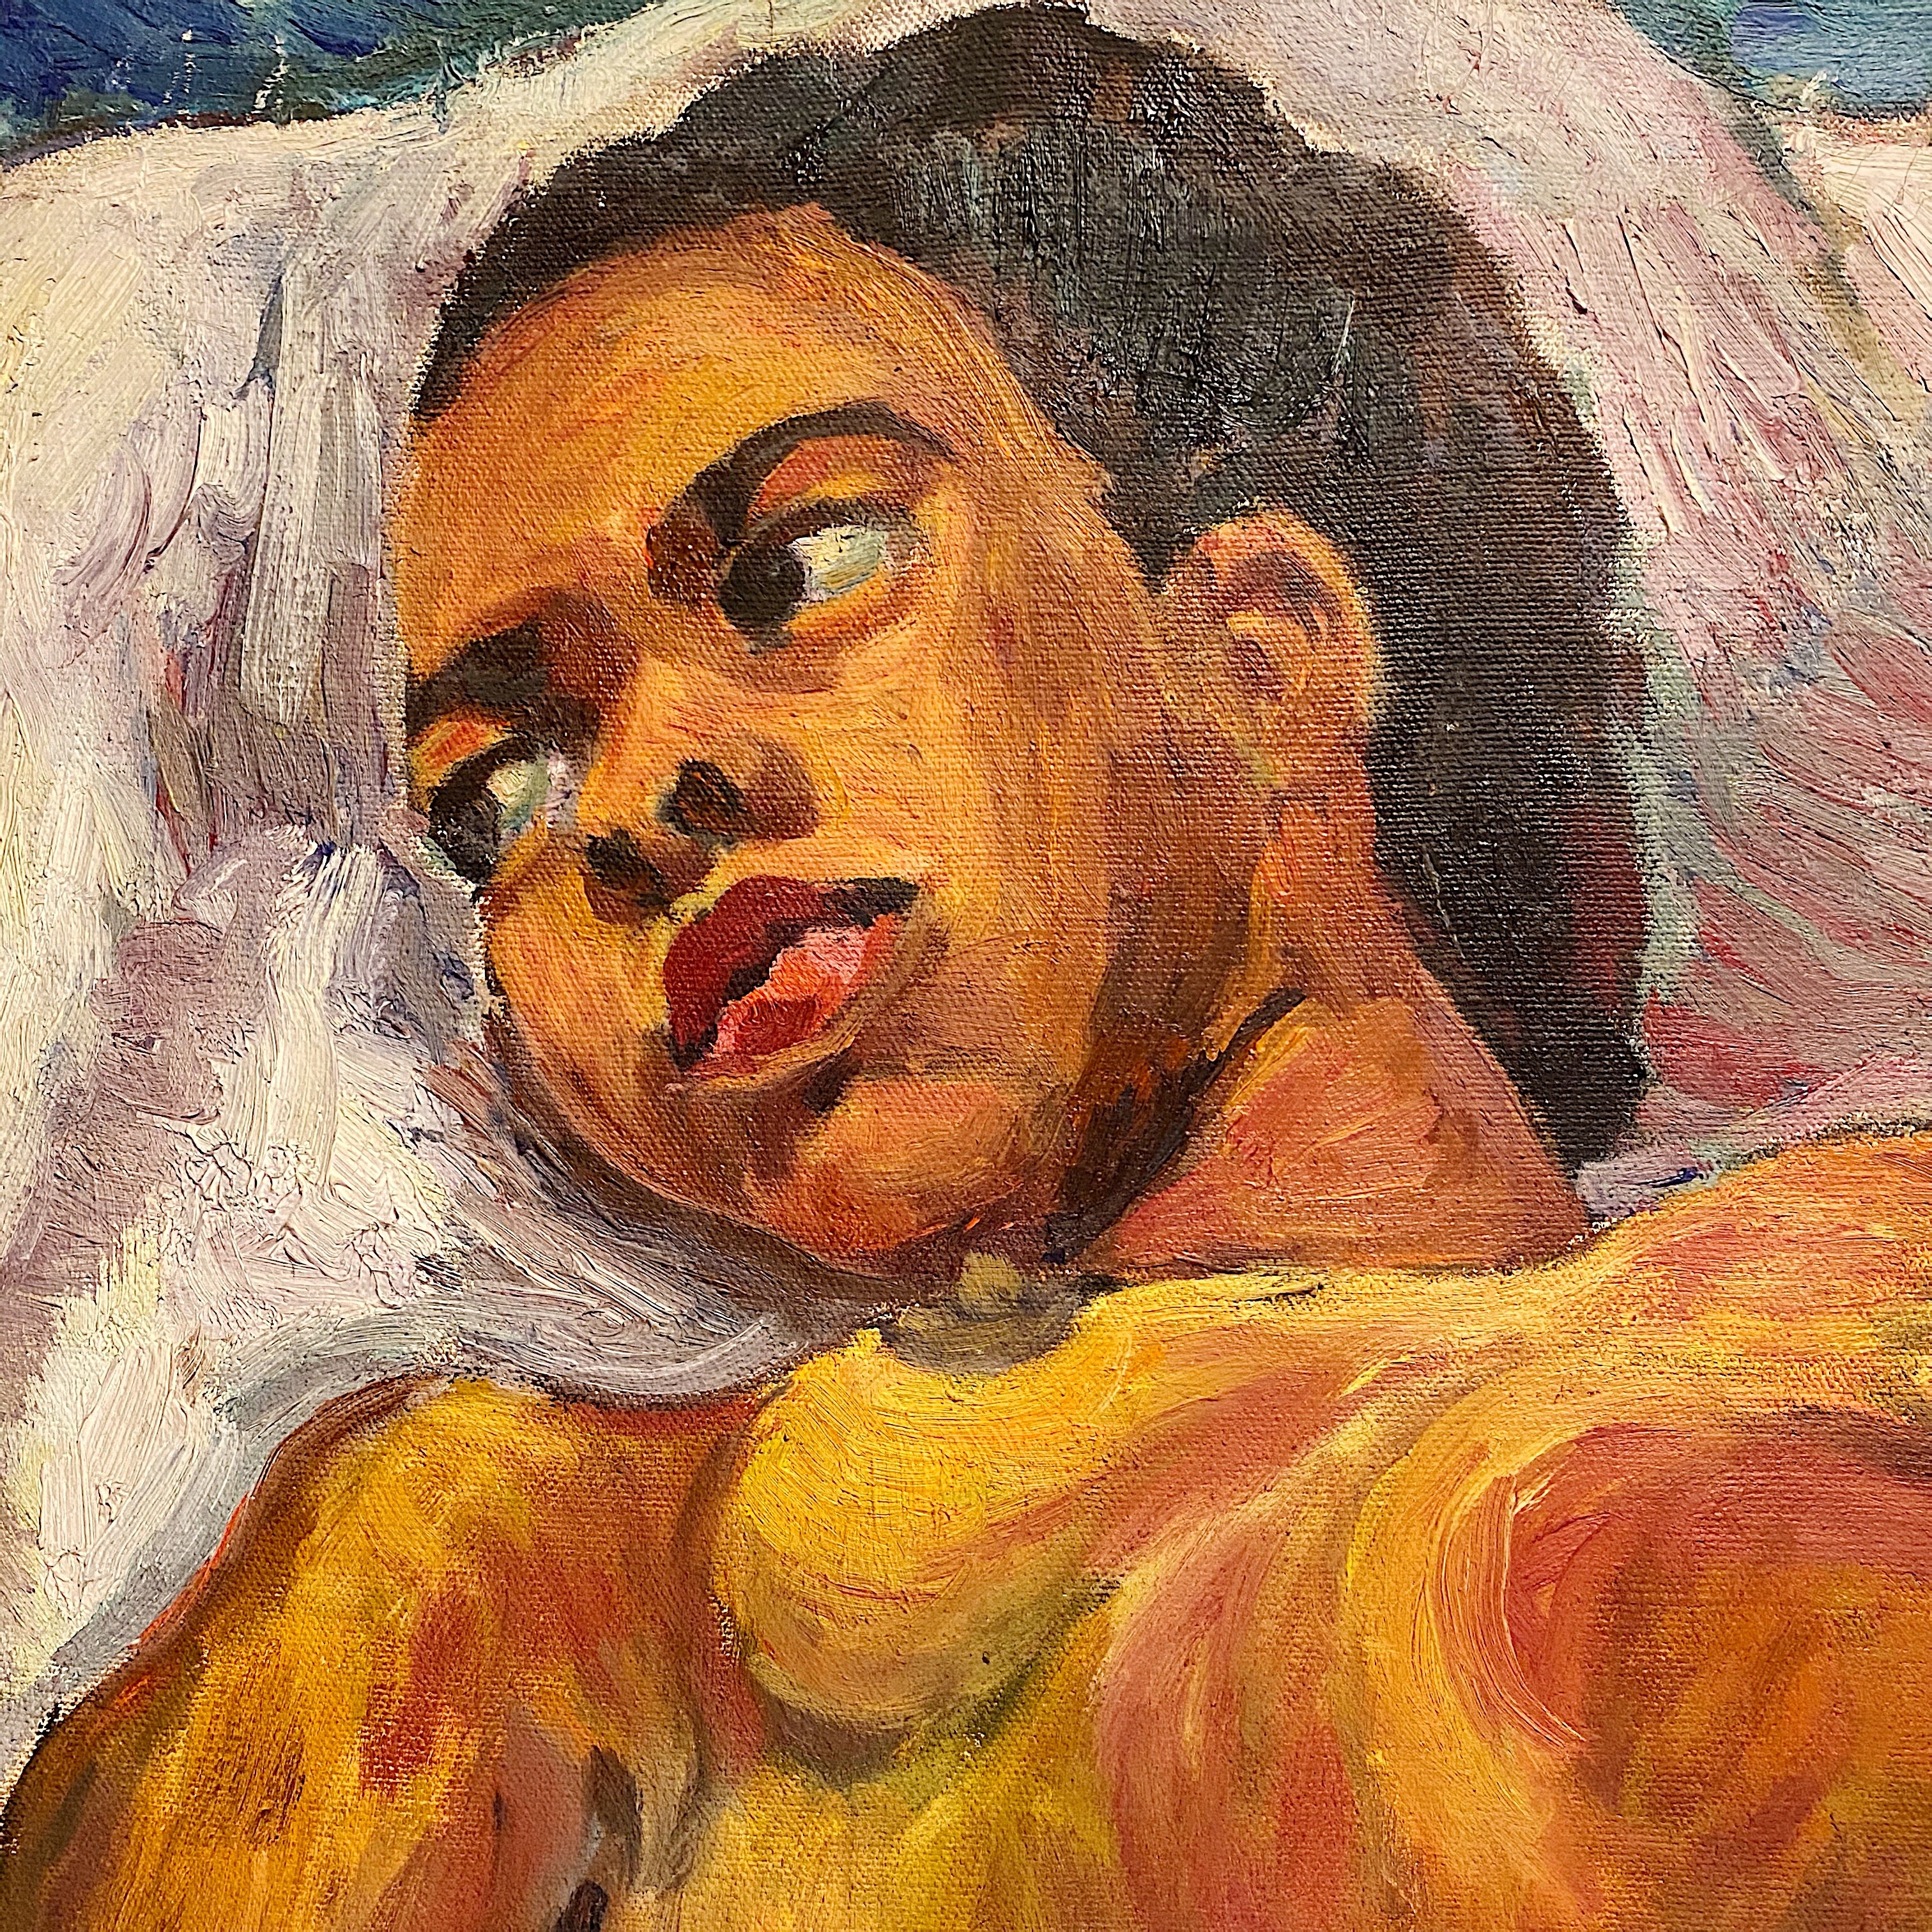 Head of WPA Era Painting of African American Nude Woman by Lillian Jean Nosko - 1940s Chicago Institute of Art - Midcentury Artwork - Listed Artist